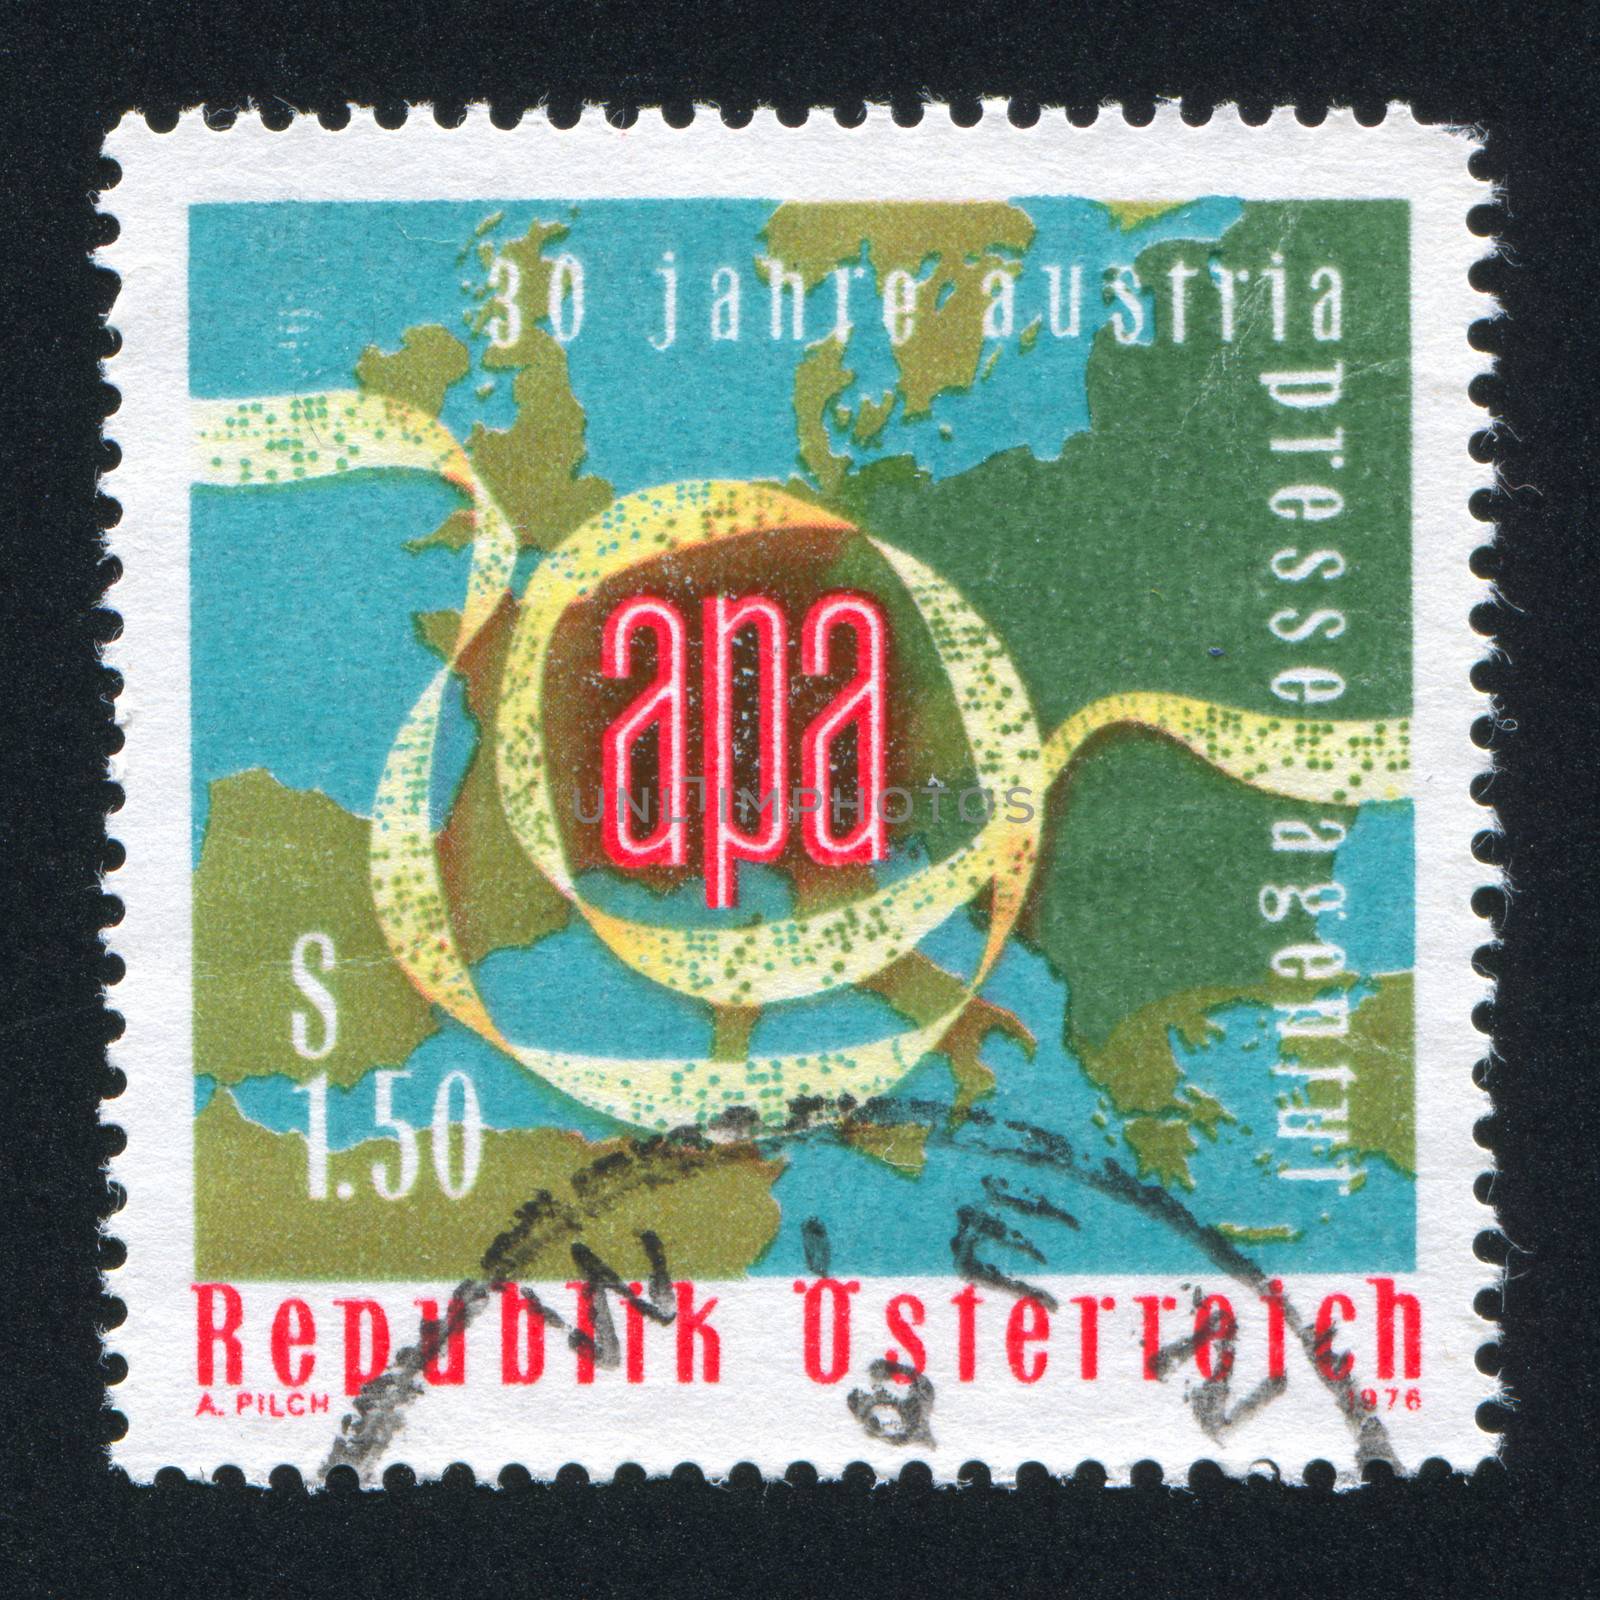 AUSTRIA - CIRCA 1976: stamp printed by Austria, shows Punched Tape, Map of Europe, circa 1976